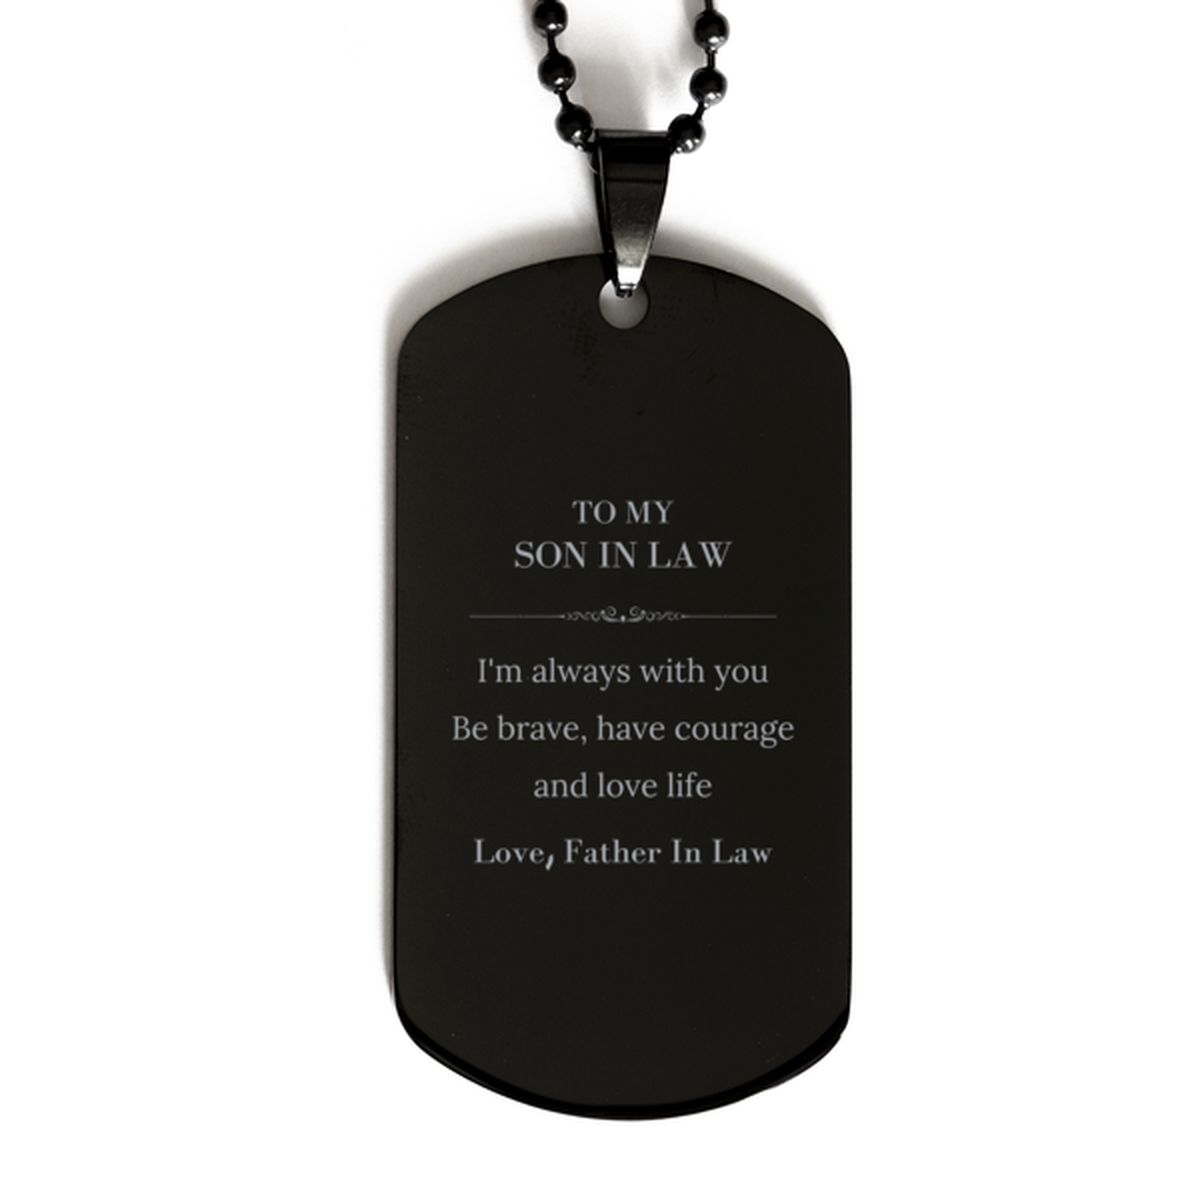 To My Son In Law Gifts from Father In Law, Unique Black Dog Tag Inspirational Christmas Birthday Graduation Gifts for Son In Law I'm always with you. Be brave, have courage and love life. Love, Father In Law